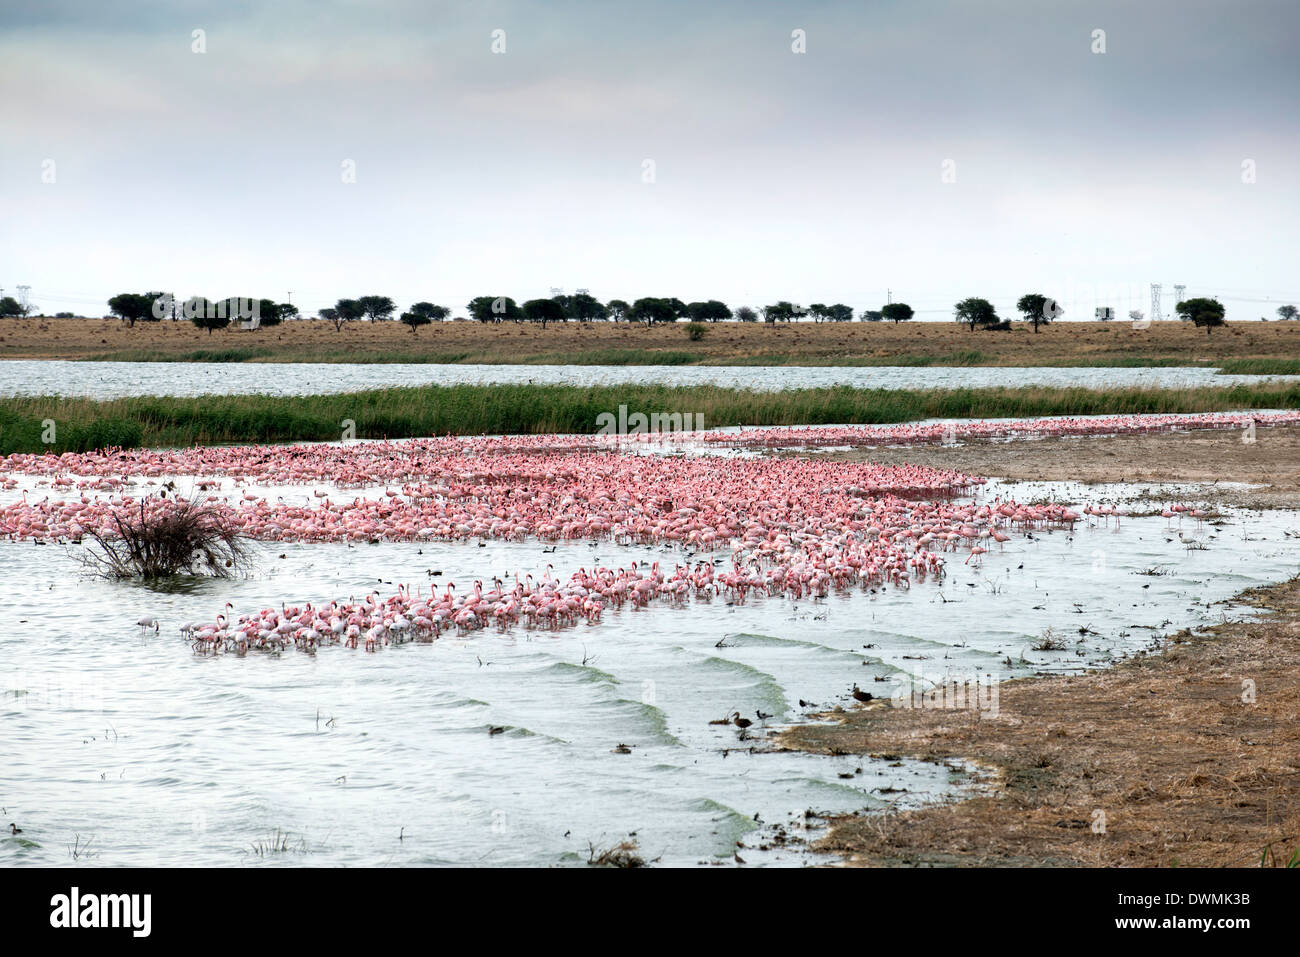 Kamfers Dam, an important wetland with breeding colony of lesser flamingoes (Phoenicopterus minor), Northern Cape, South Africa Stock Photo